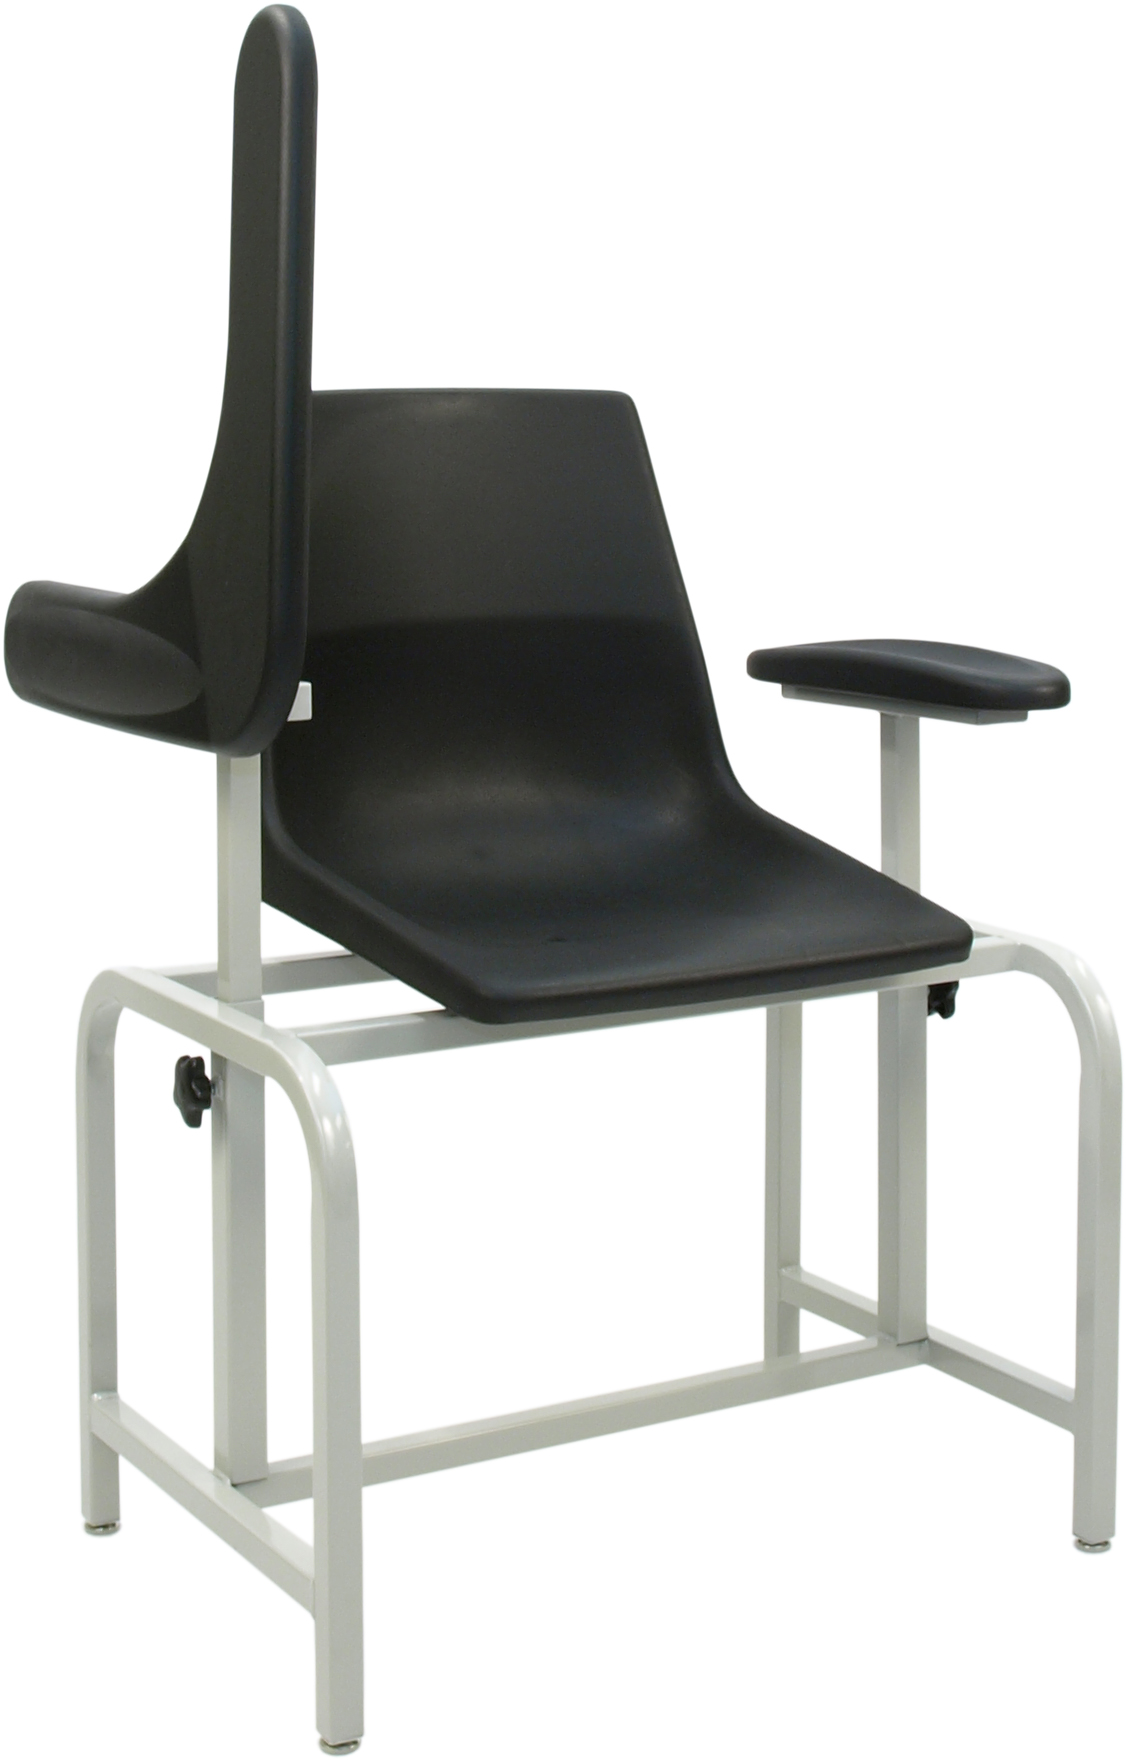 BLOOD DRAWING CHAIR W/PLASTIC SEAT WINCO